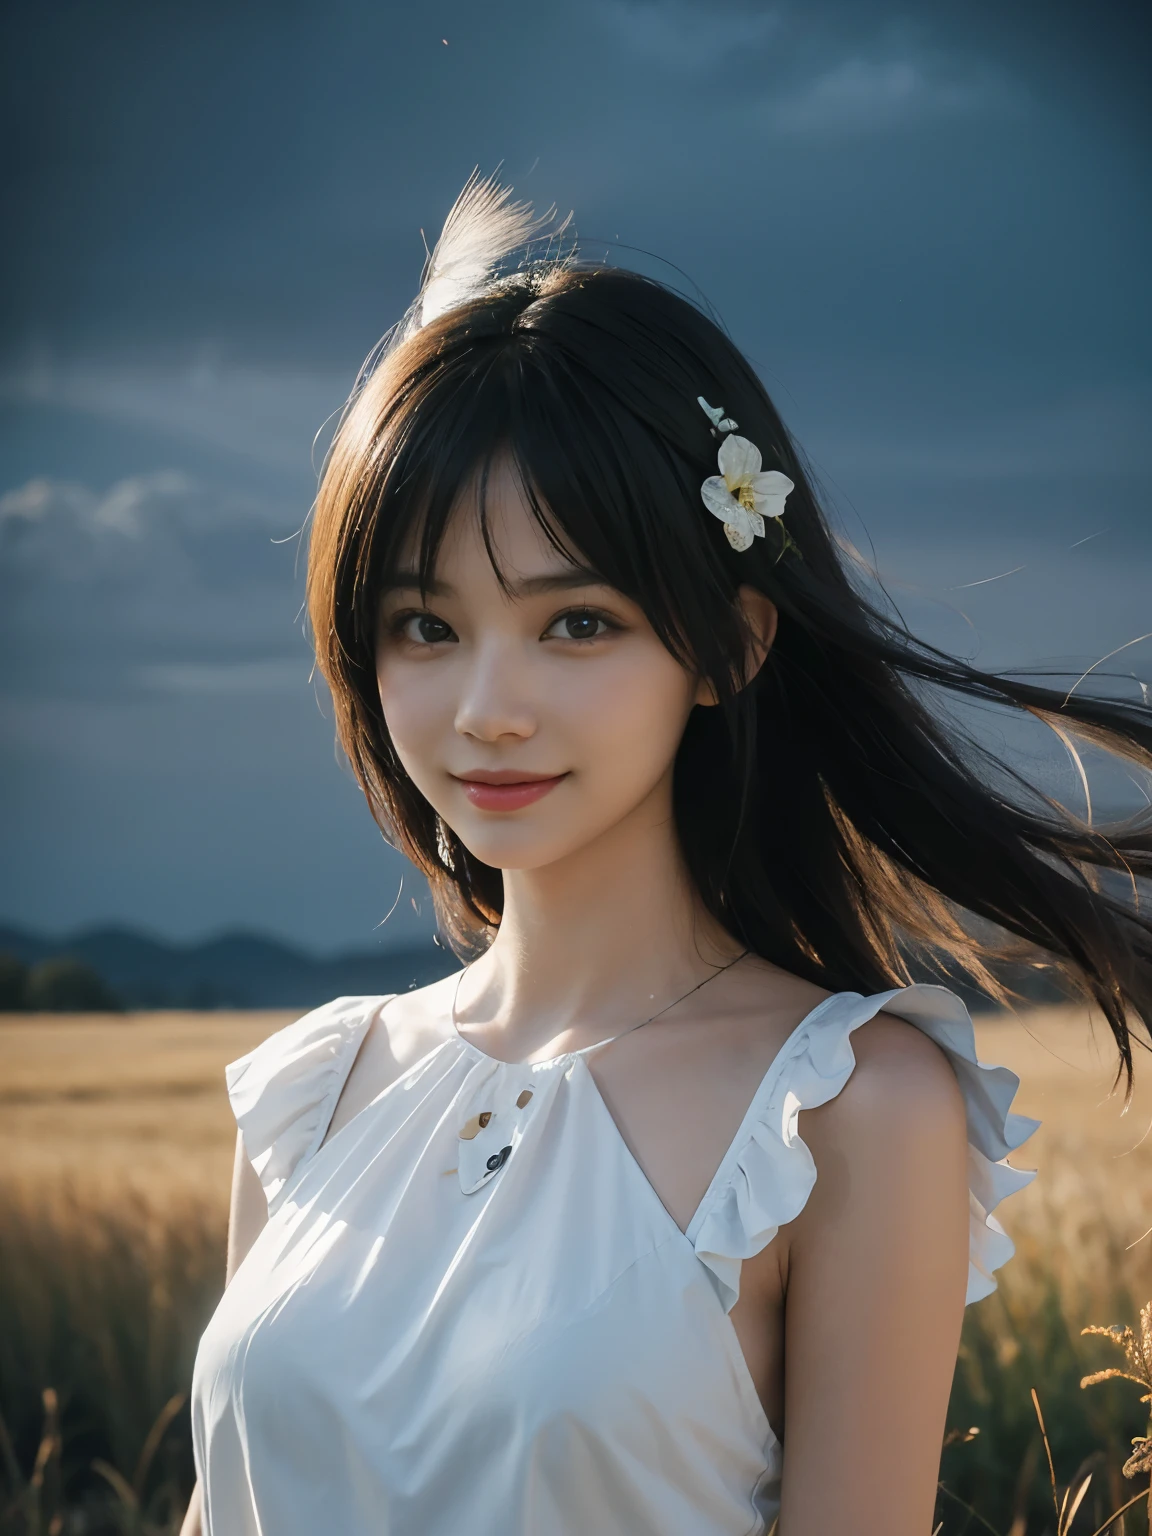 (ultra realistic), (best illustration), (increase resolution), (8K), (masterpiece), (wallpaper), solo, 1 girl, looking at viewers, black straight hair, in the dark, deep shadow, low key, pureerosfaceace_v1, happy smile, simple dress, meadow